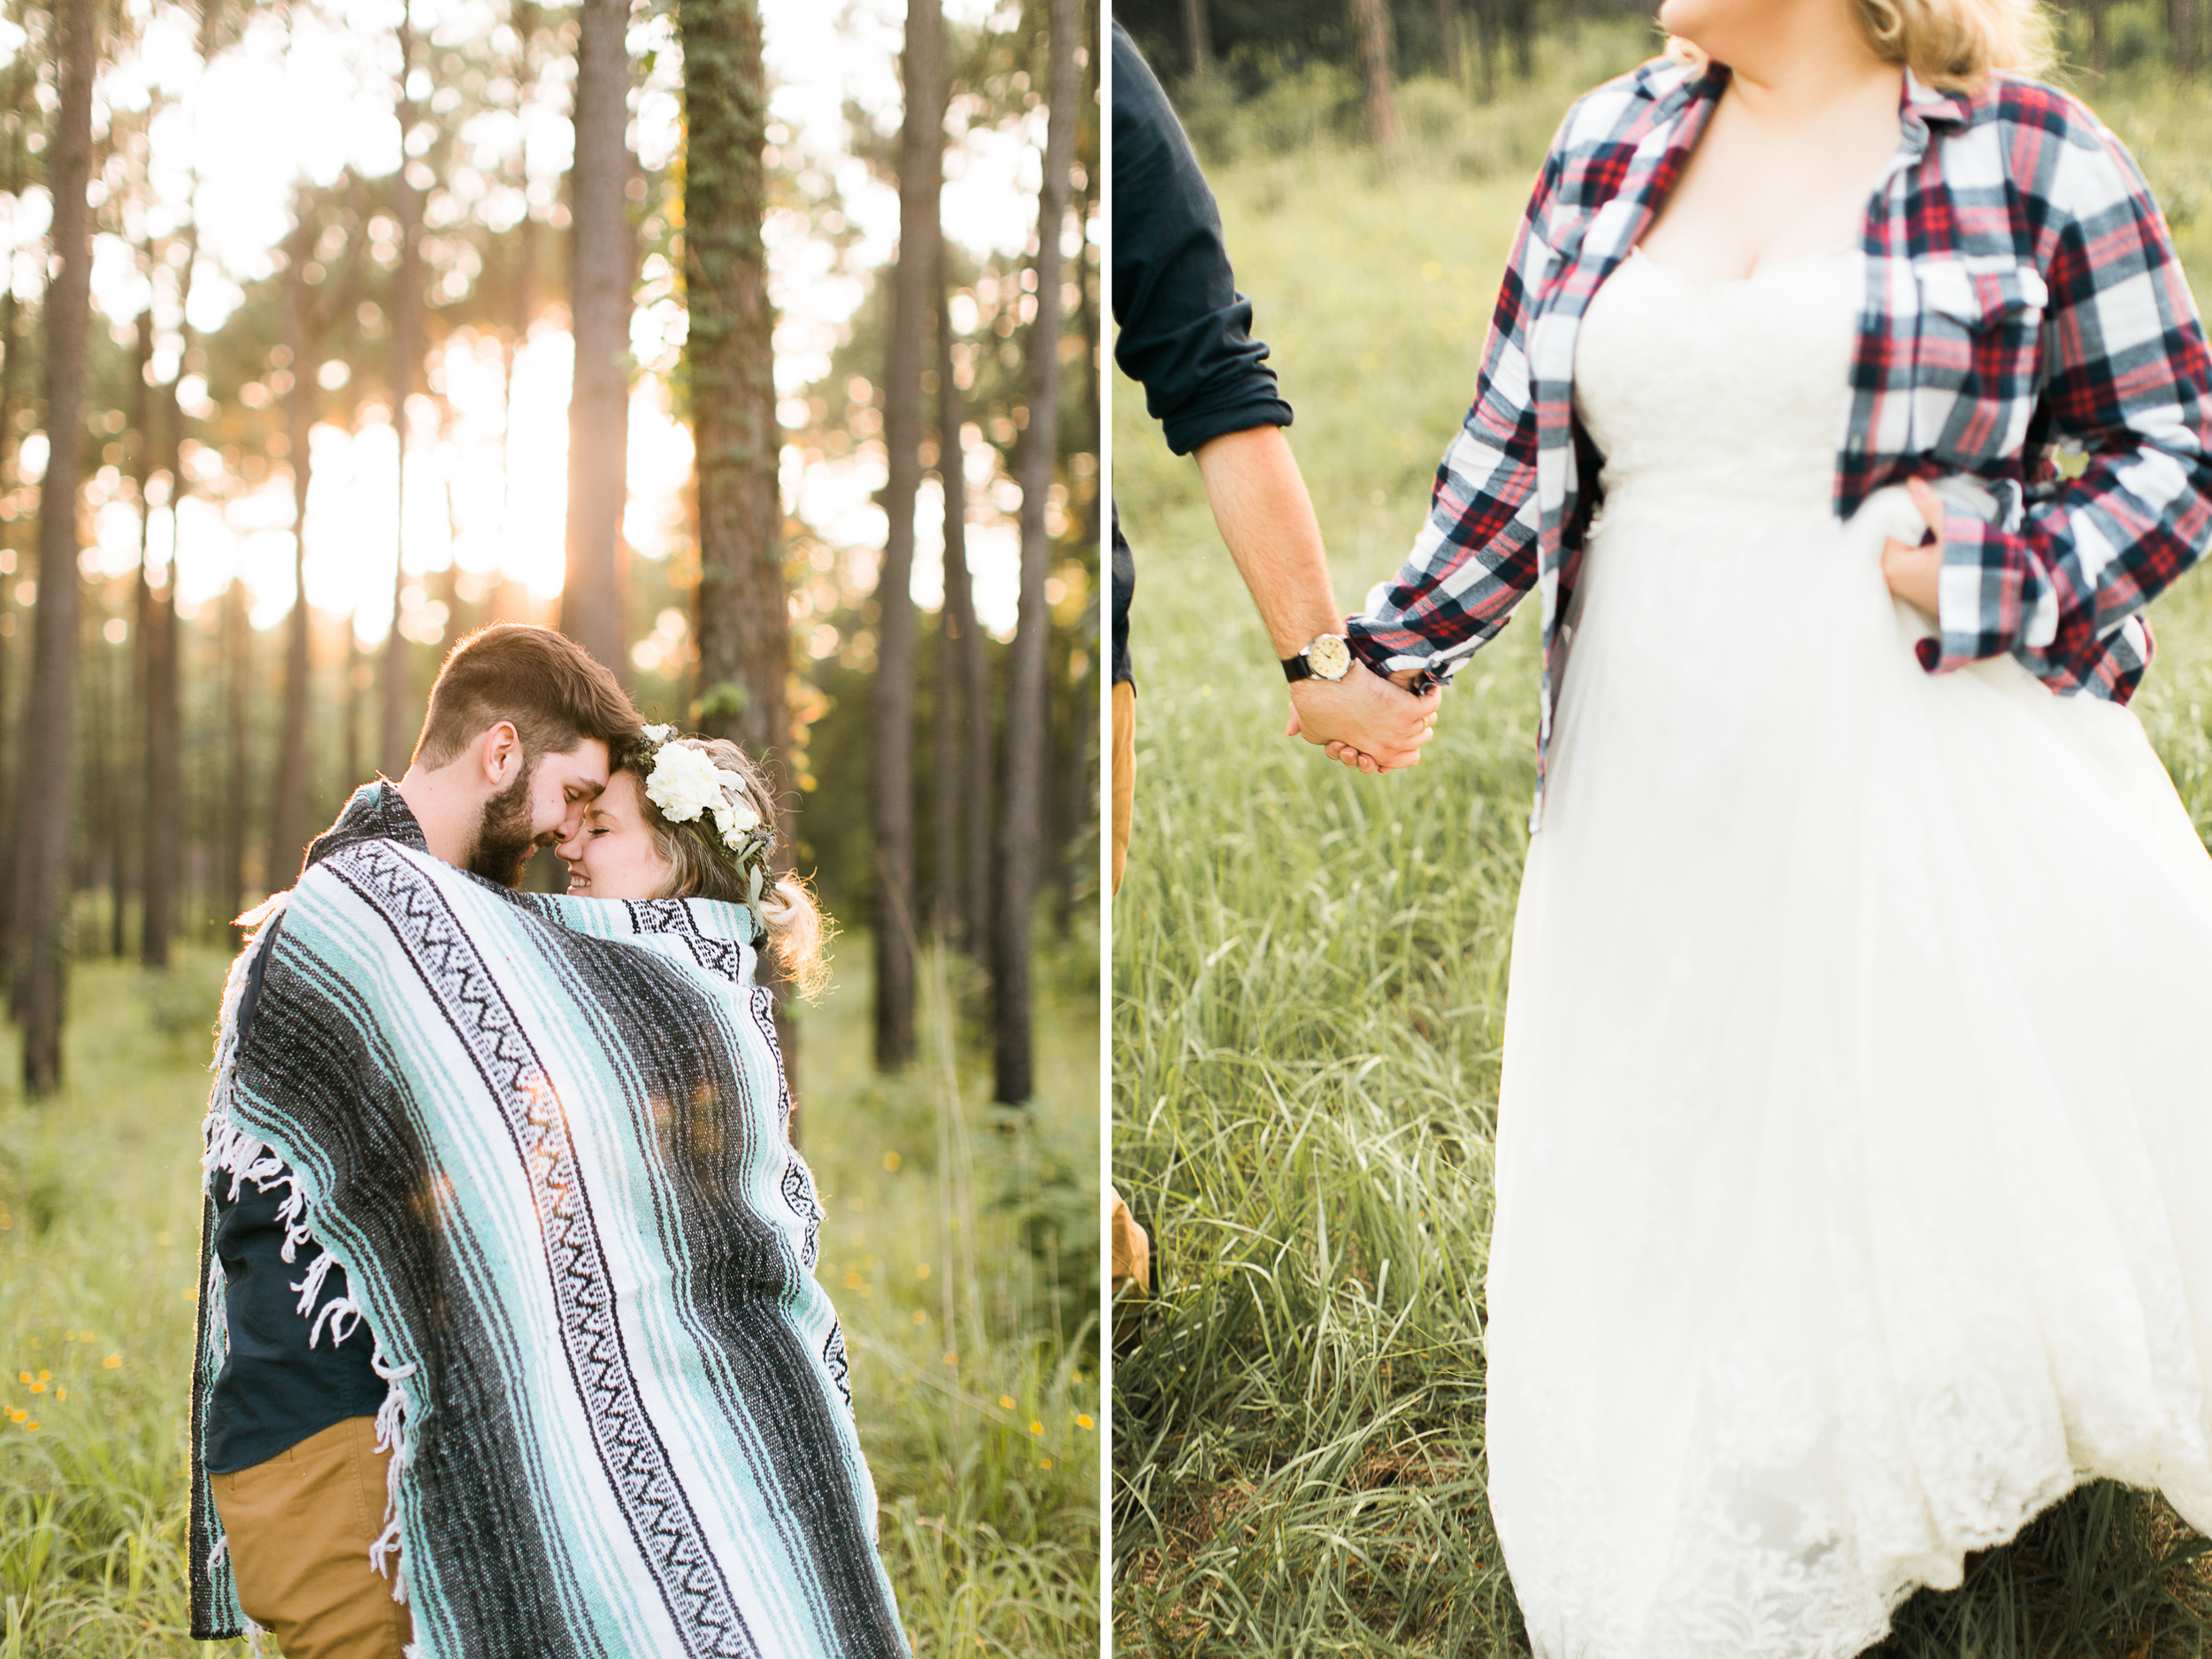 whimsical adventure bridal photo session after the wedding | www.abbihearne.com | adventure photography